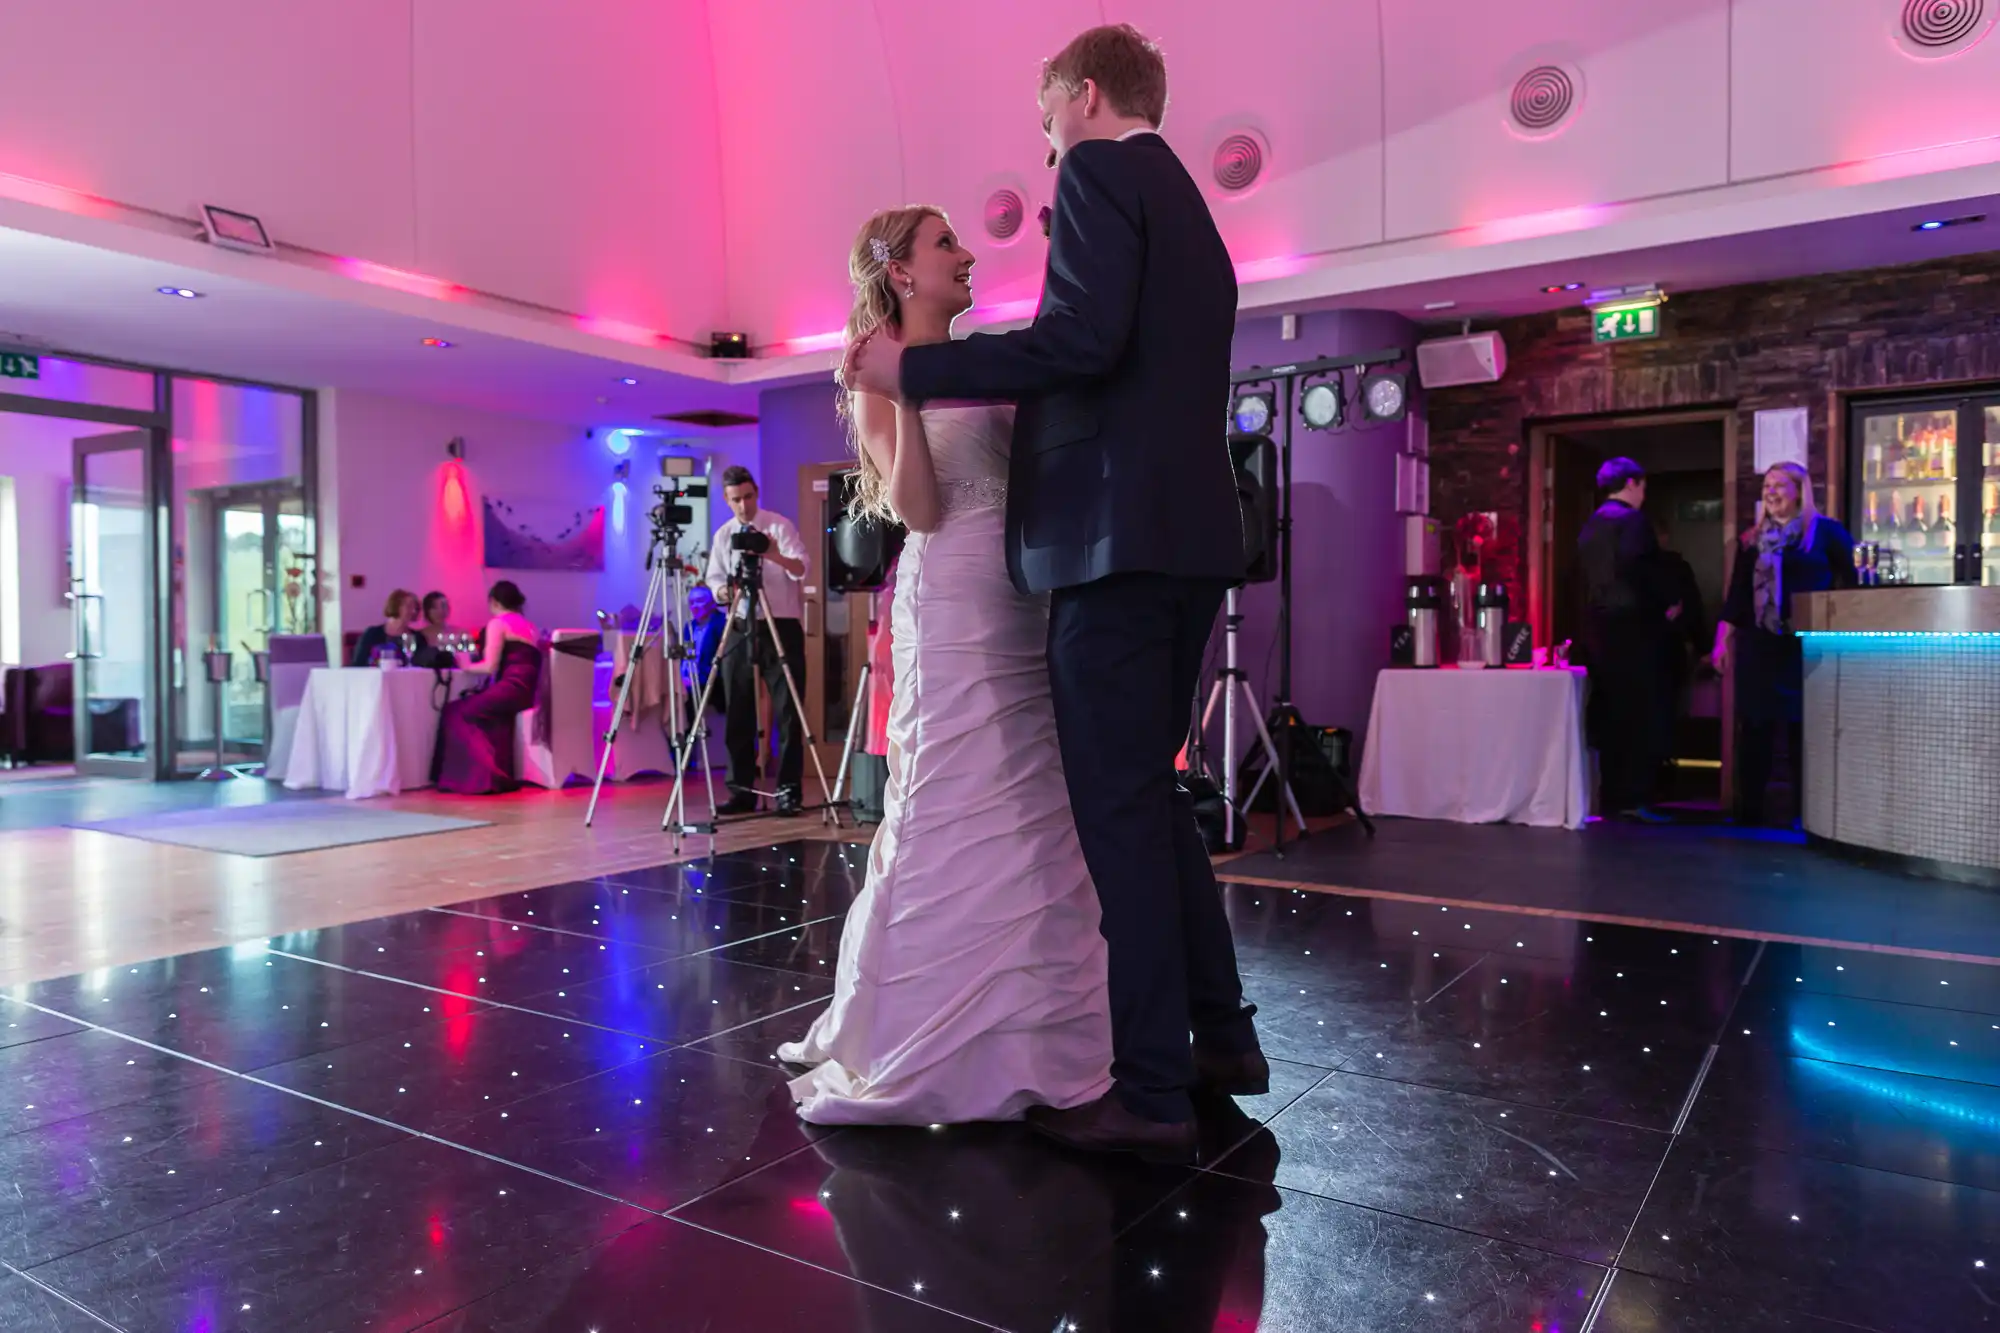 A bride and groom share a dance in a dimly lit venue with pink lighting, surrounded by guests and a video camera on a tripod.